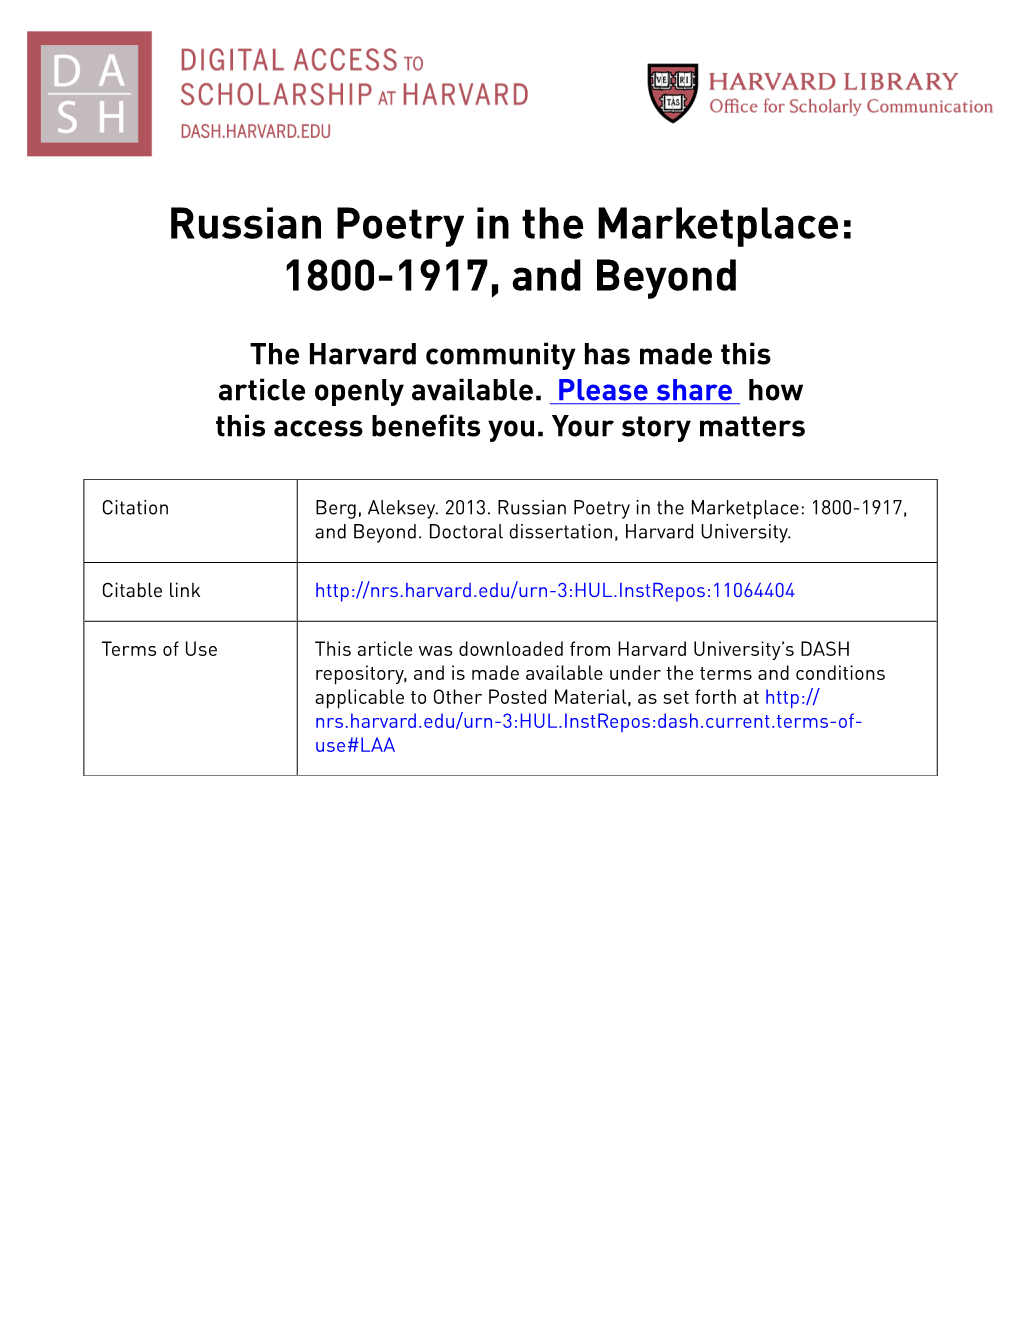 Russian Poetry in the Marketplace: 1800-1917, and Beyond